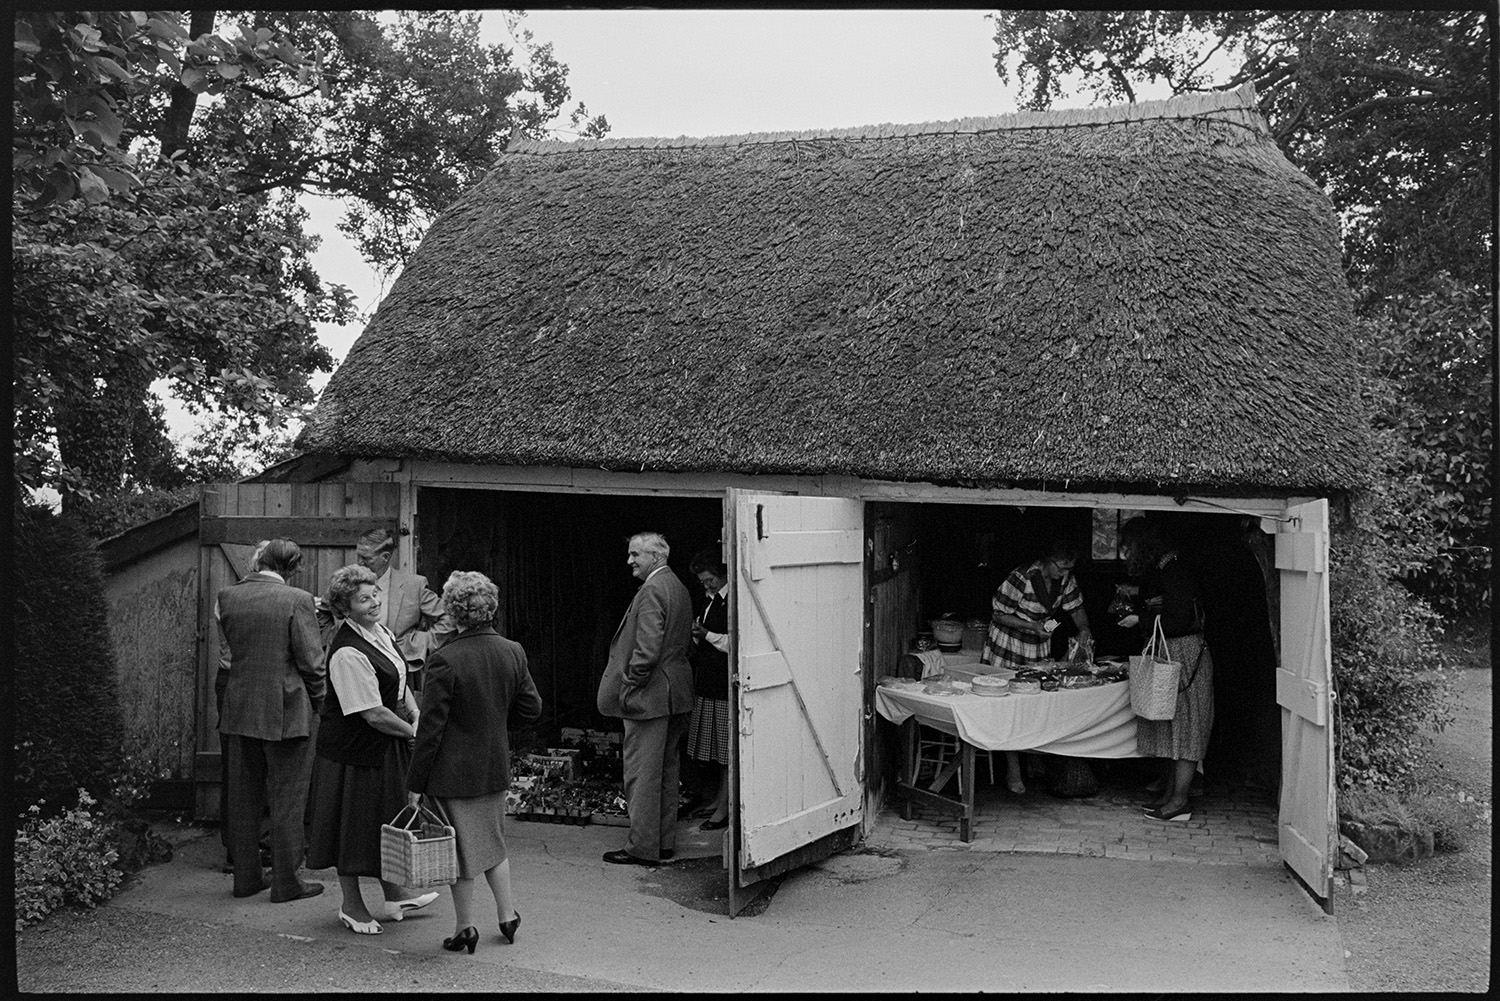 Open garden, with cake stall and people looking around garden. Thatched garage.
[Visitors at an open garden event at Highdown, Ashreigney, hosted by Moggie Dew. There is a thatched double garage with open wooden doors. One garage has potted plants on the floor, the other garage has a table selling cakes.]